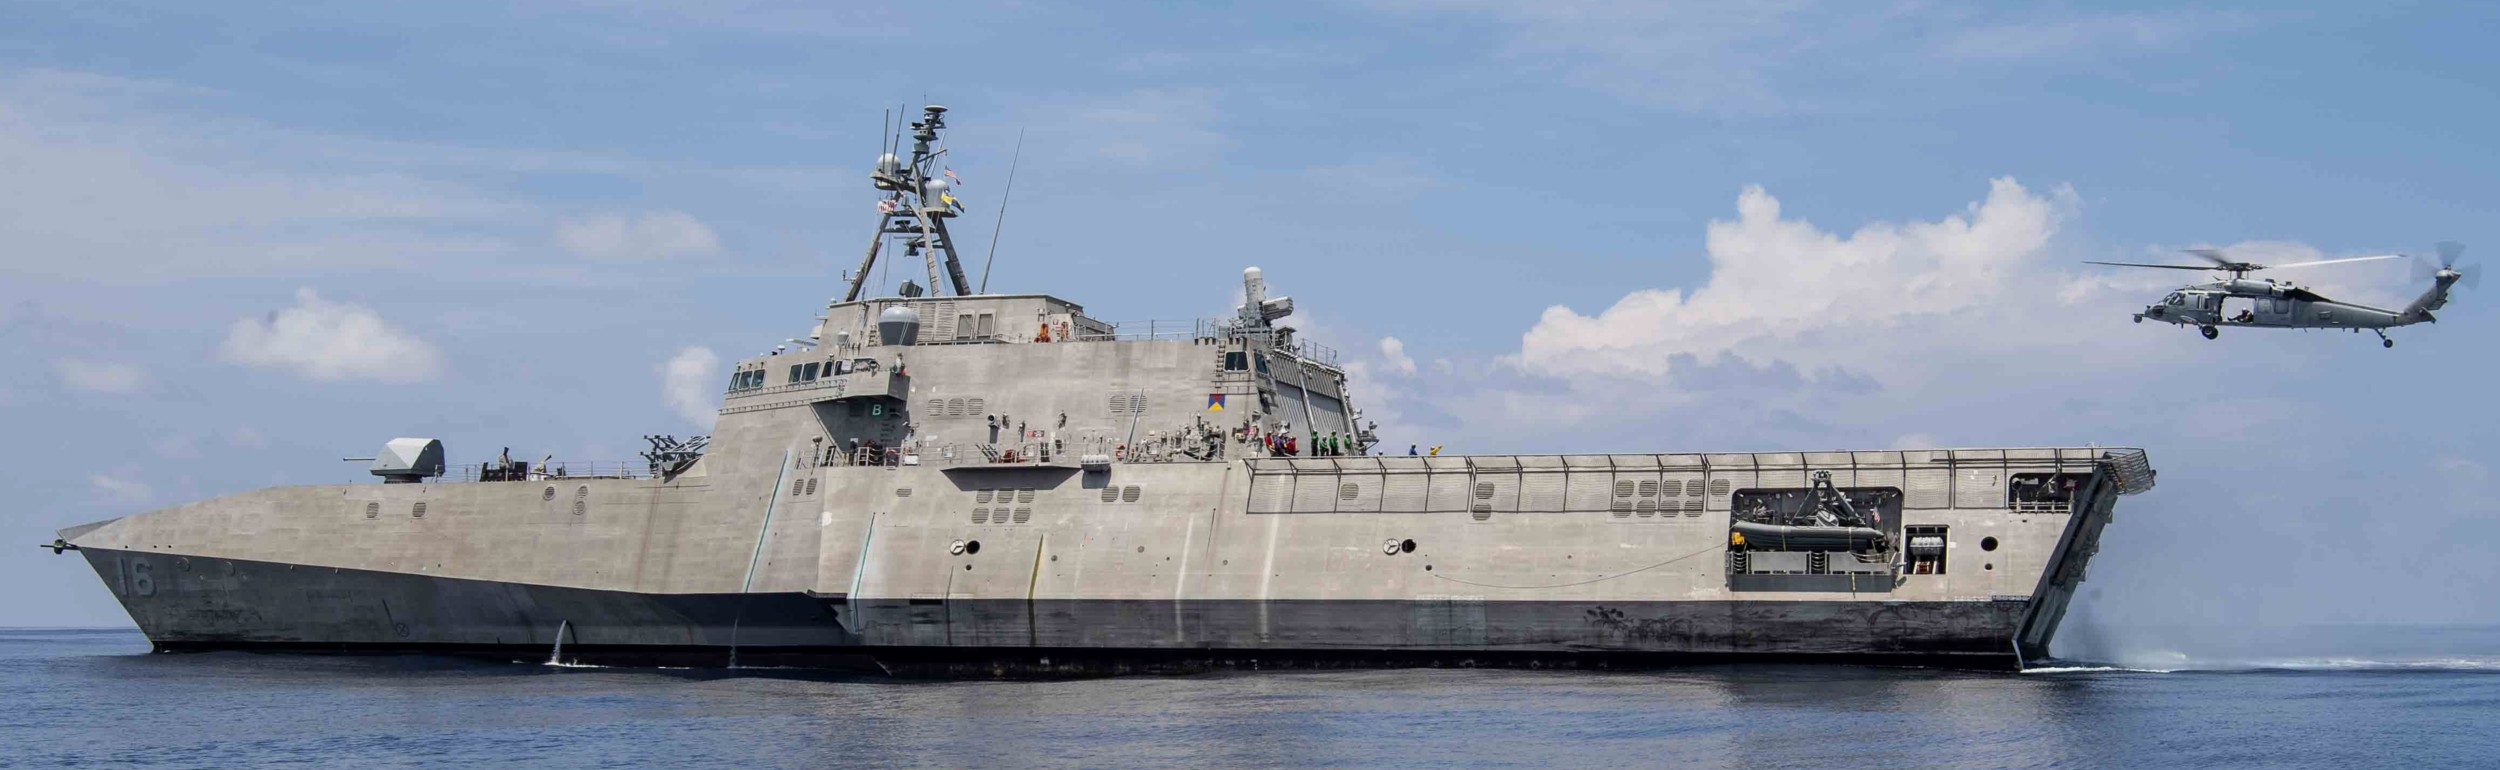 lcs-16 uss tulsa independence class littoral combat ship us navy helicopter operations 31